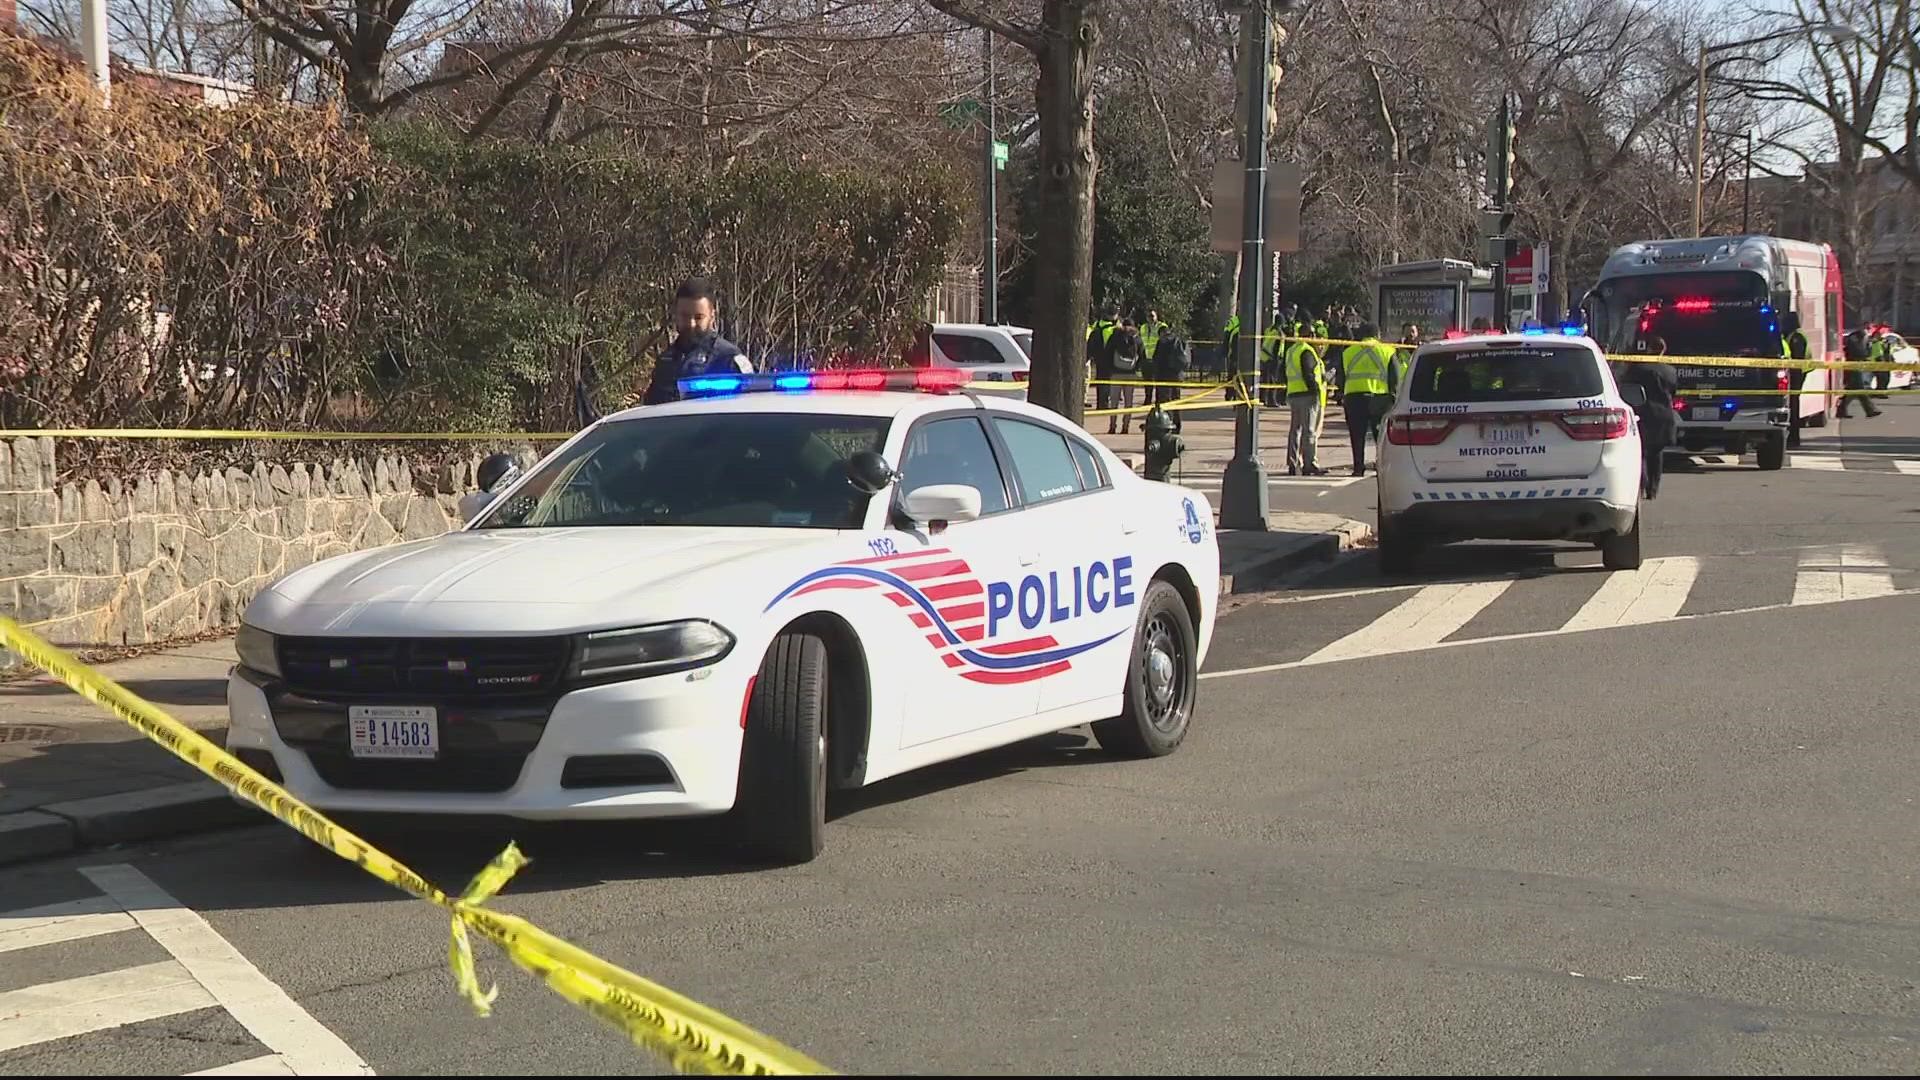 A Metro employee was killed and two other people were injured in a shooting at the Potomac Avenue Metro station in D.C. Wednesday morning